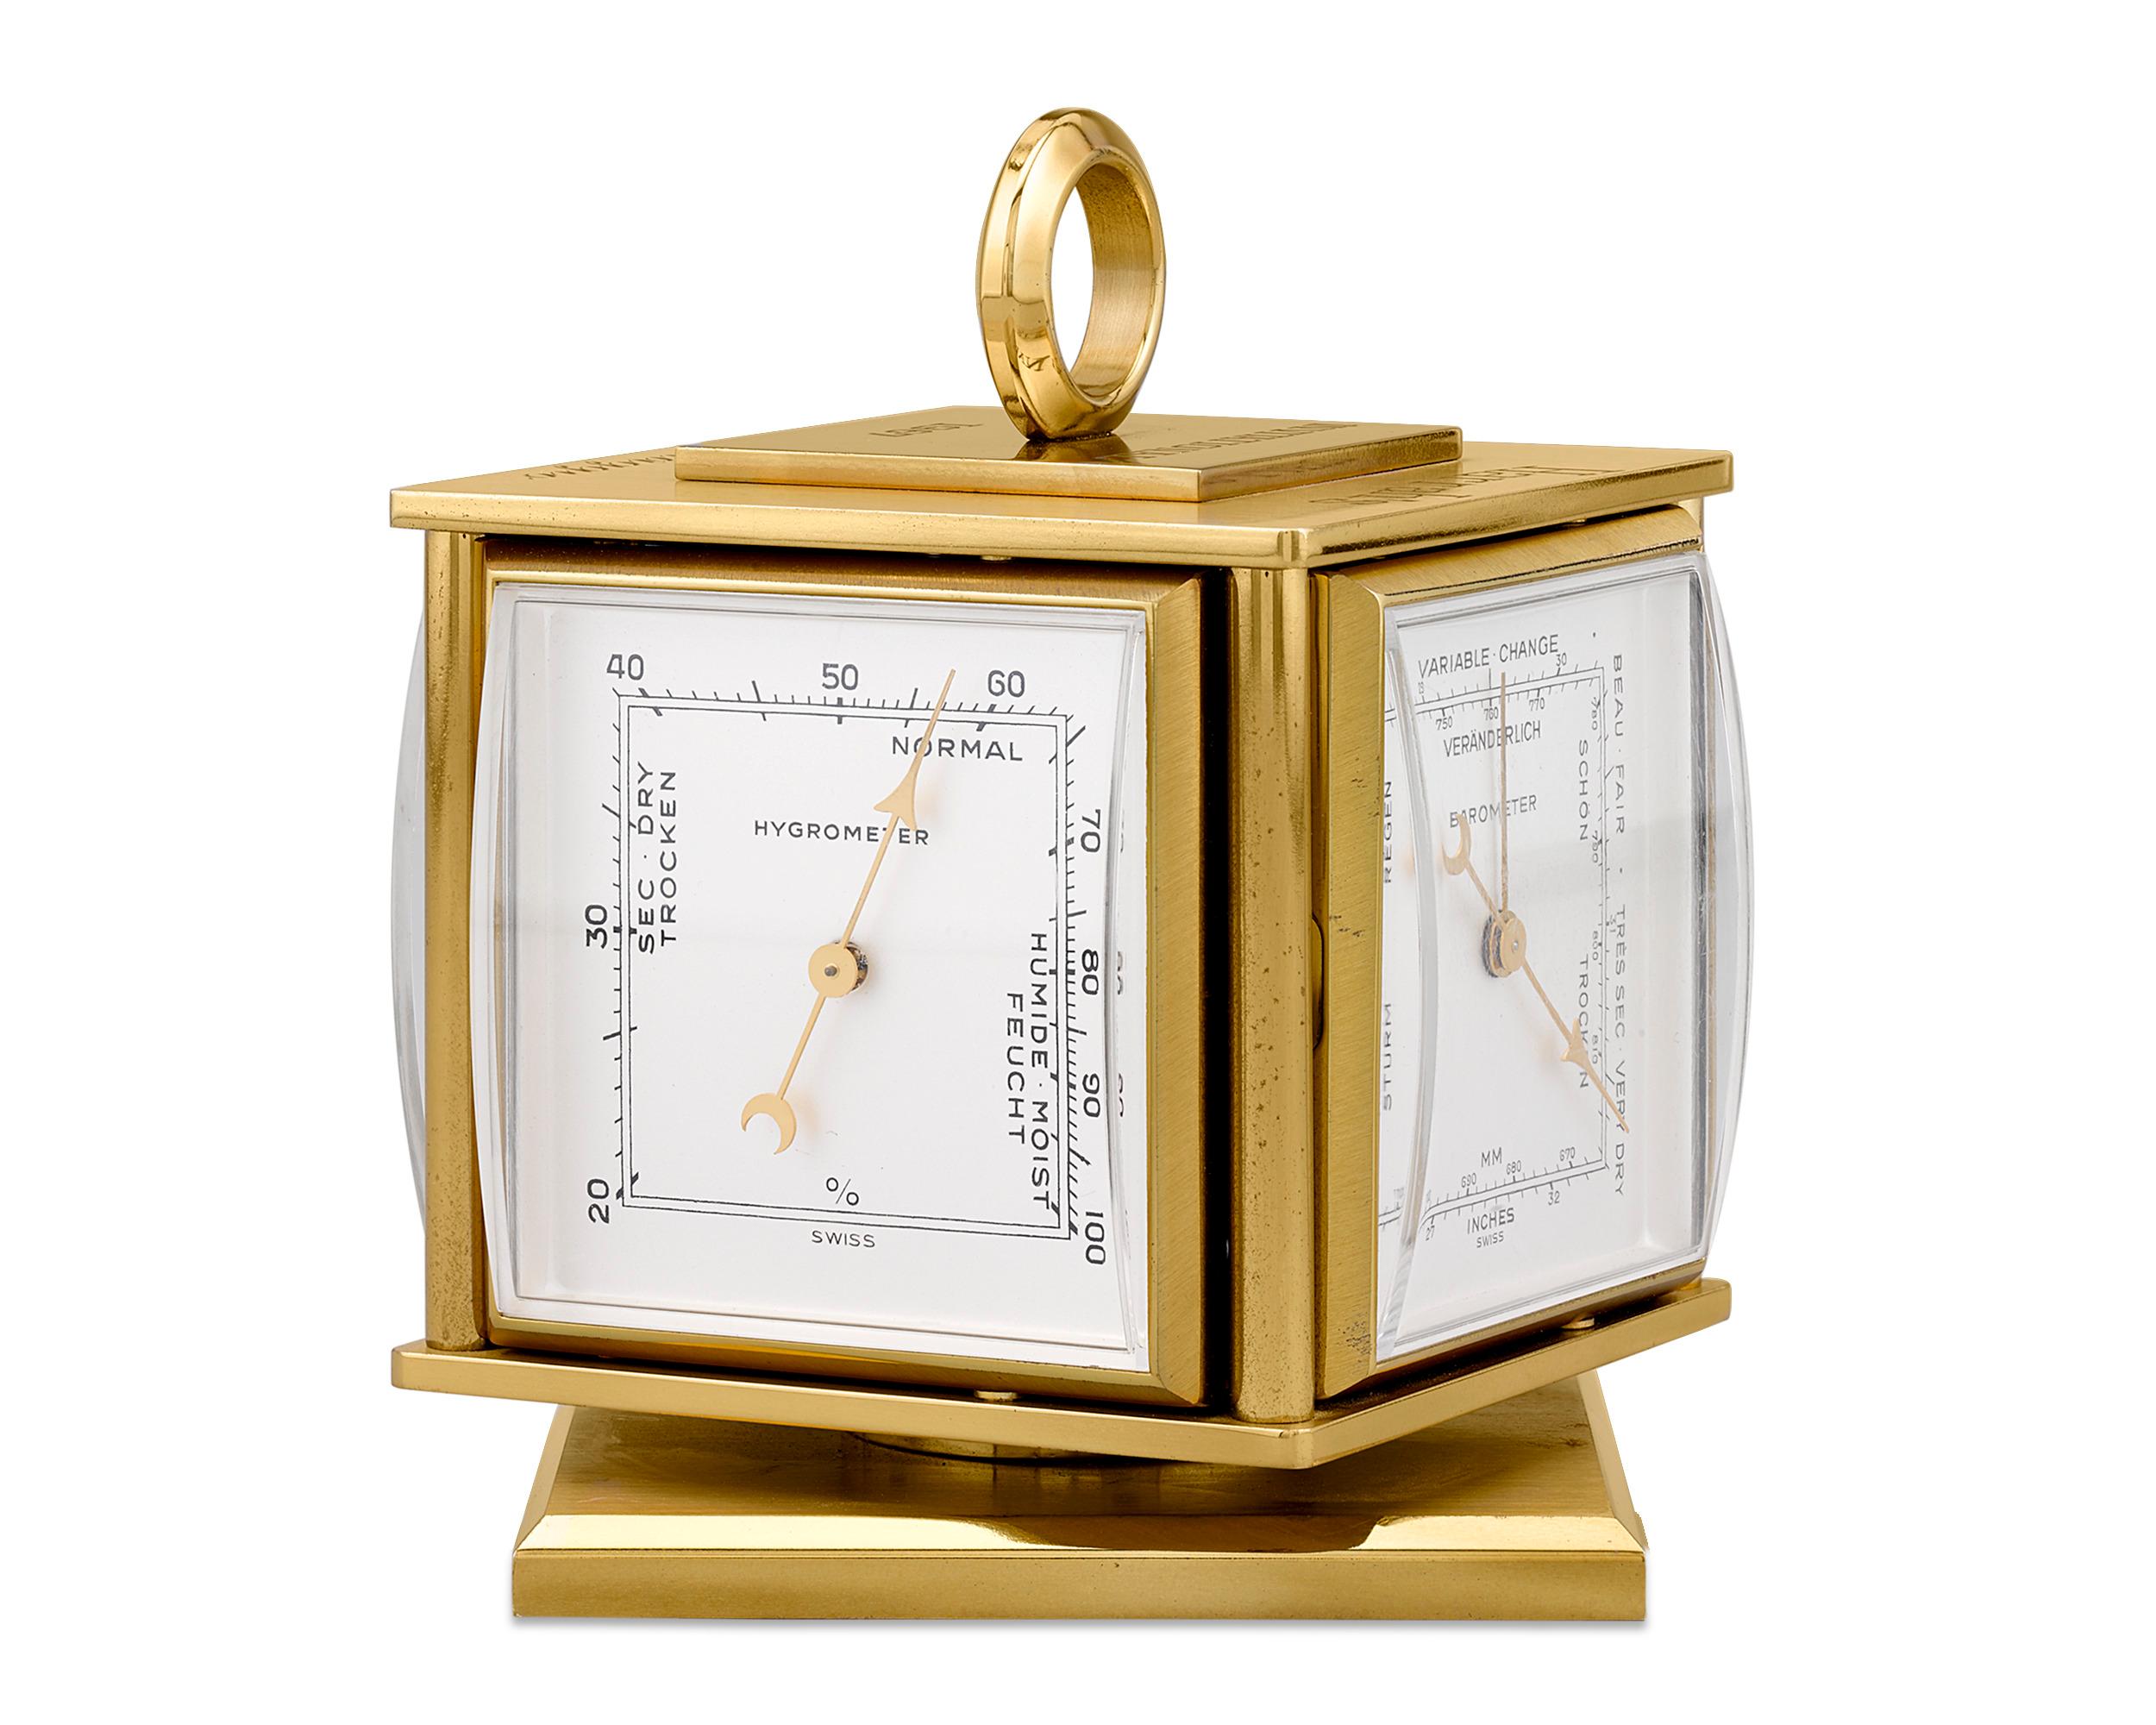 From the personal collection of the legendary Joe DiMaggio, this incredible vintage desk clock was presented to the Yankee Clipper by Harrah's for his participation in their 1967 invitational golf tournament. The Swiss timepiece was retailed by